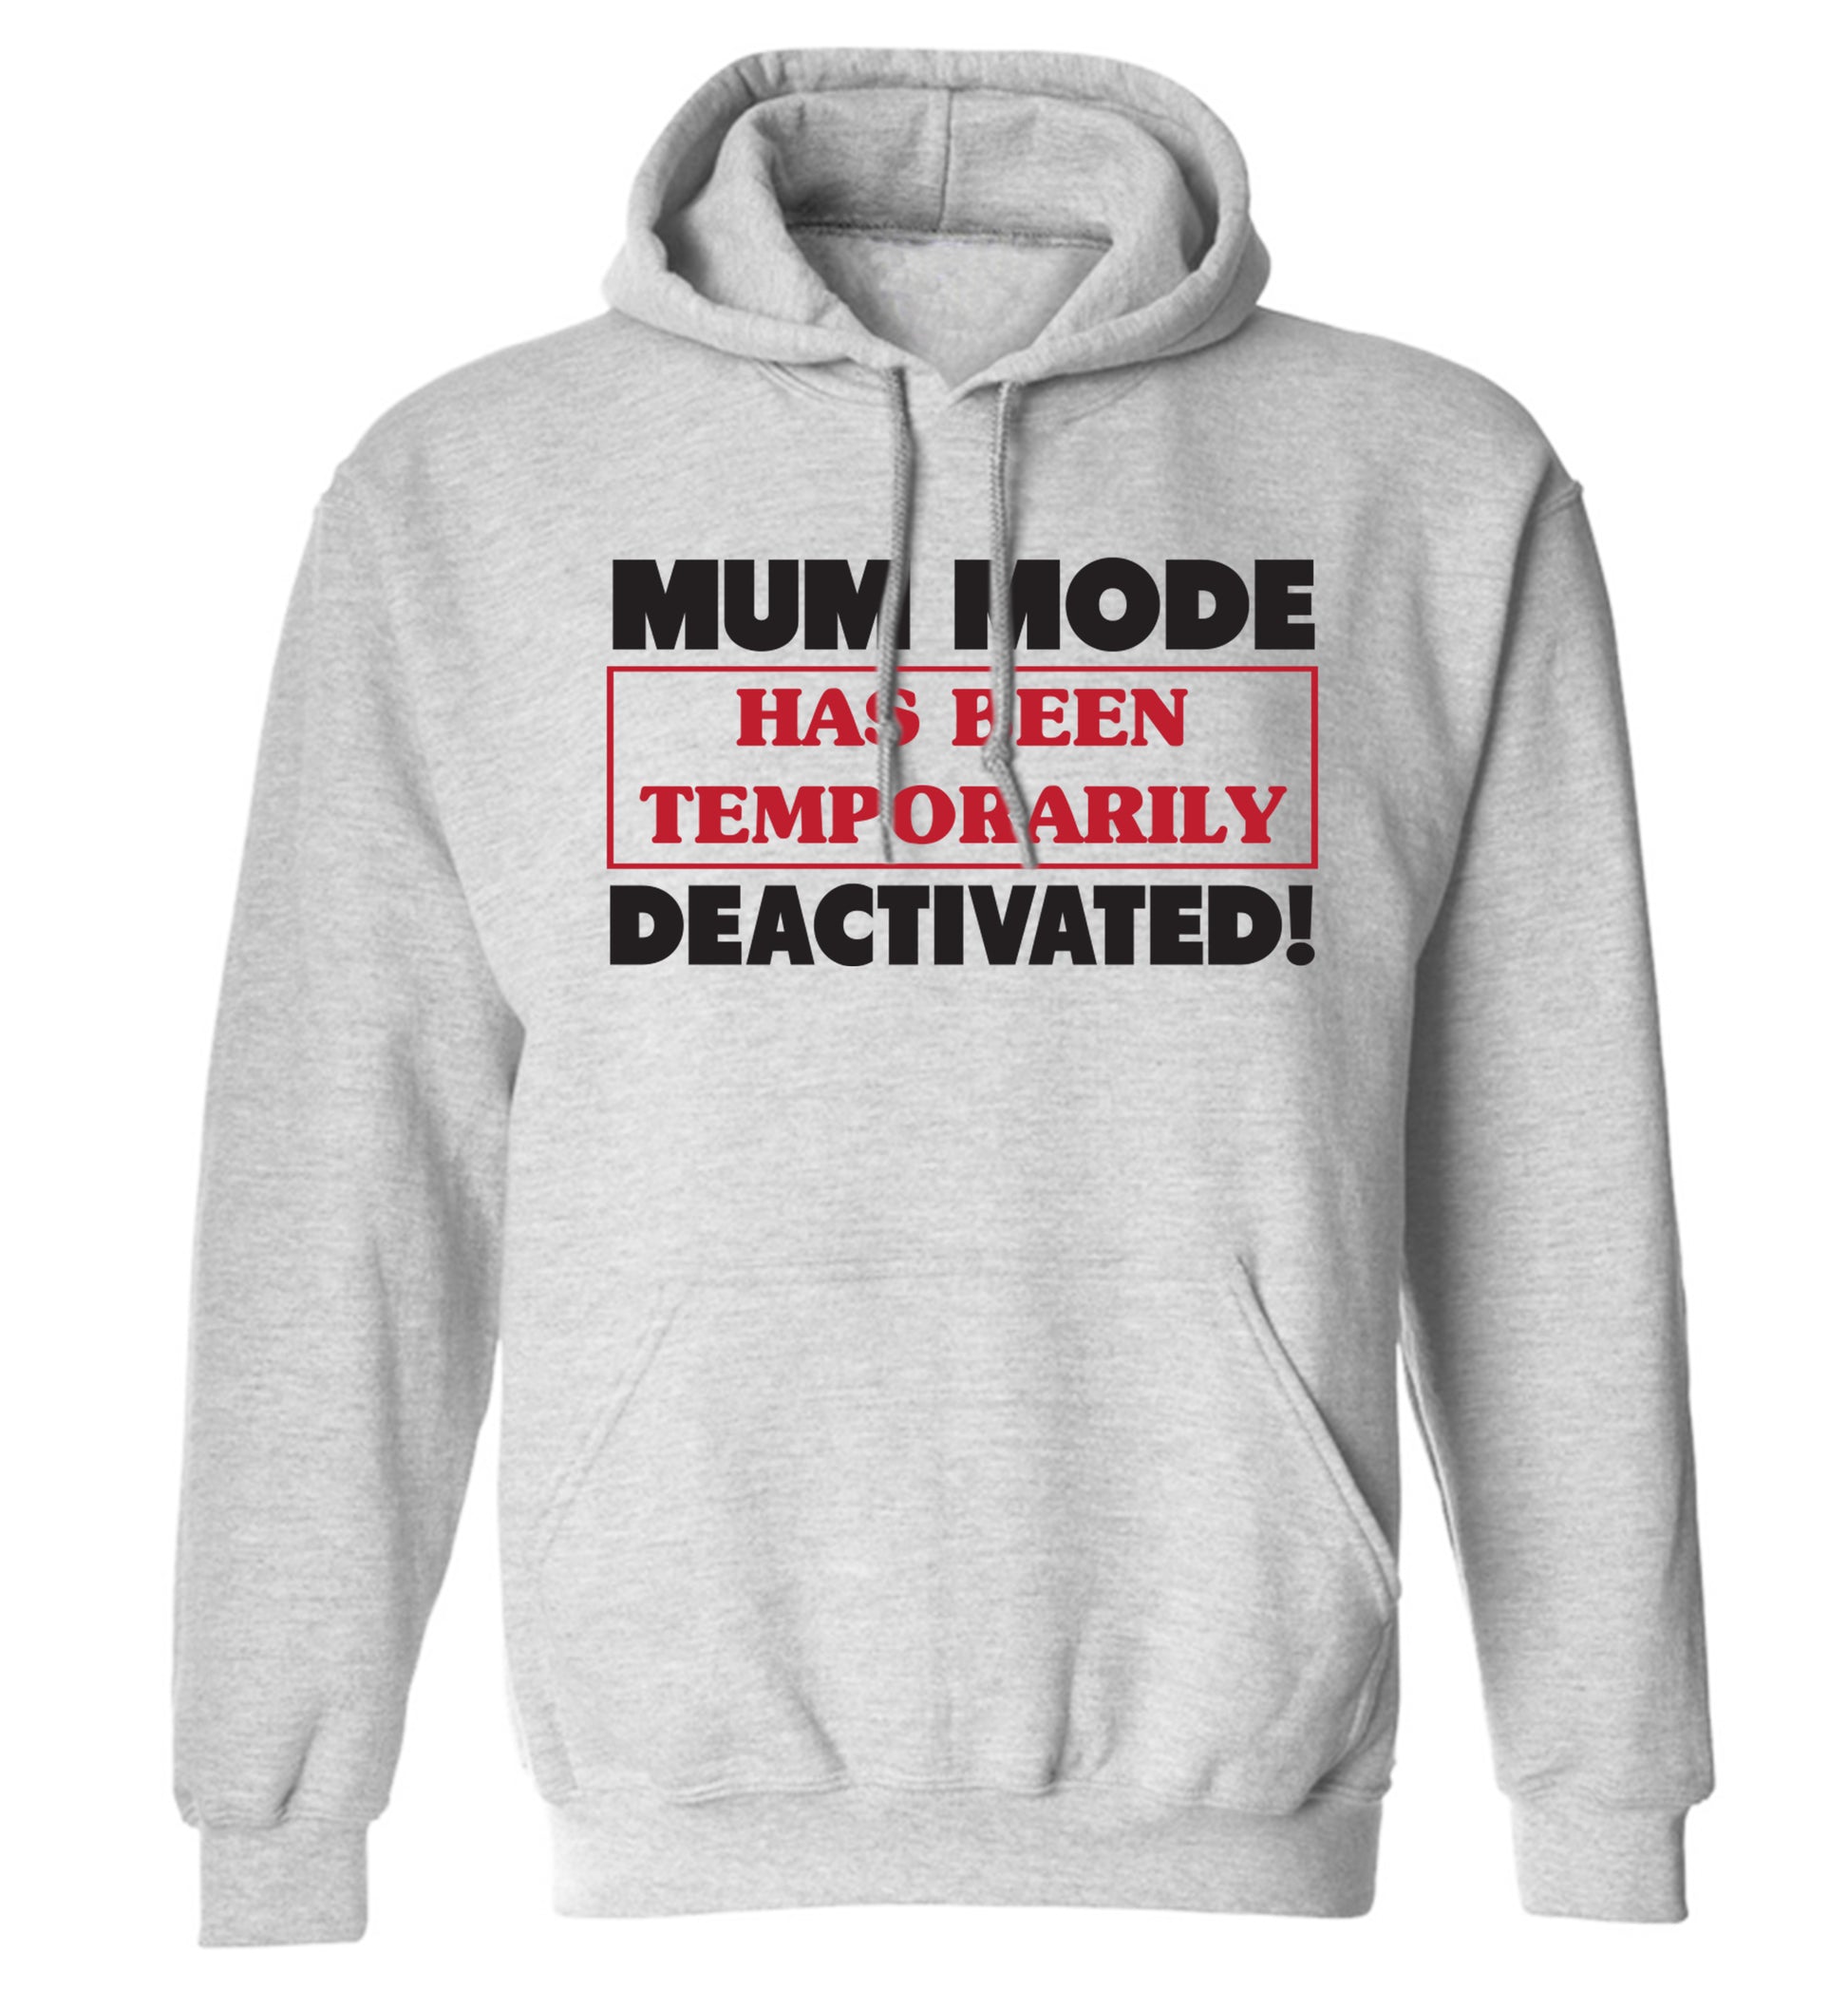 Mum mode has been temporarily deactivated! adults unisex grey hoodie 2XL